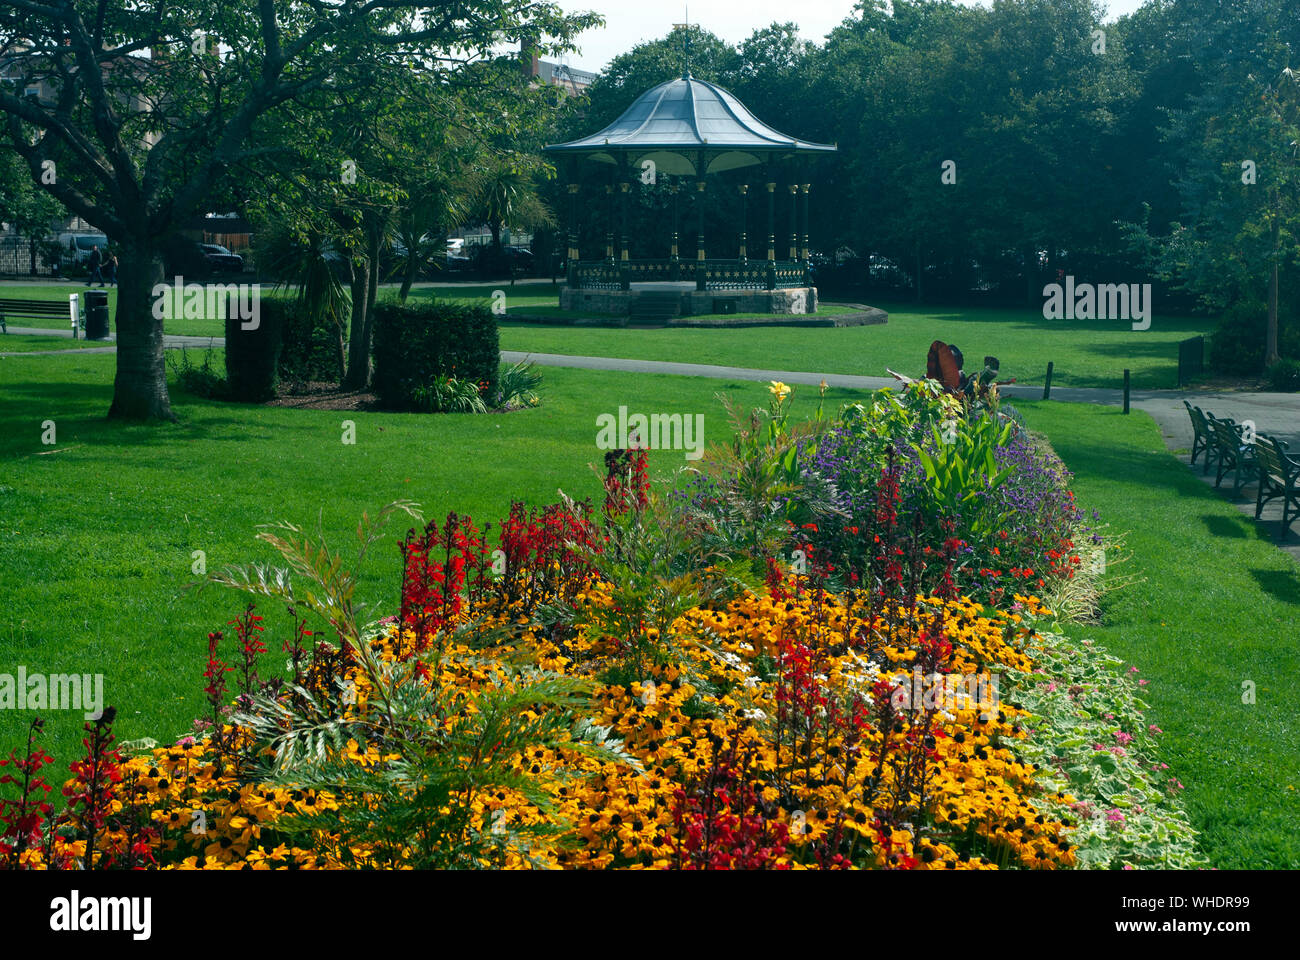 The bandstand and flower beds Grove Park in summer, Weston-Super-Mare, North Somerset, England UK Stock Photo